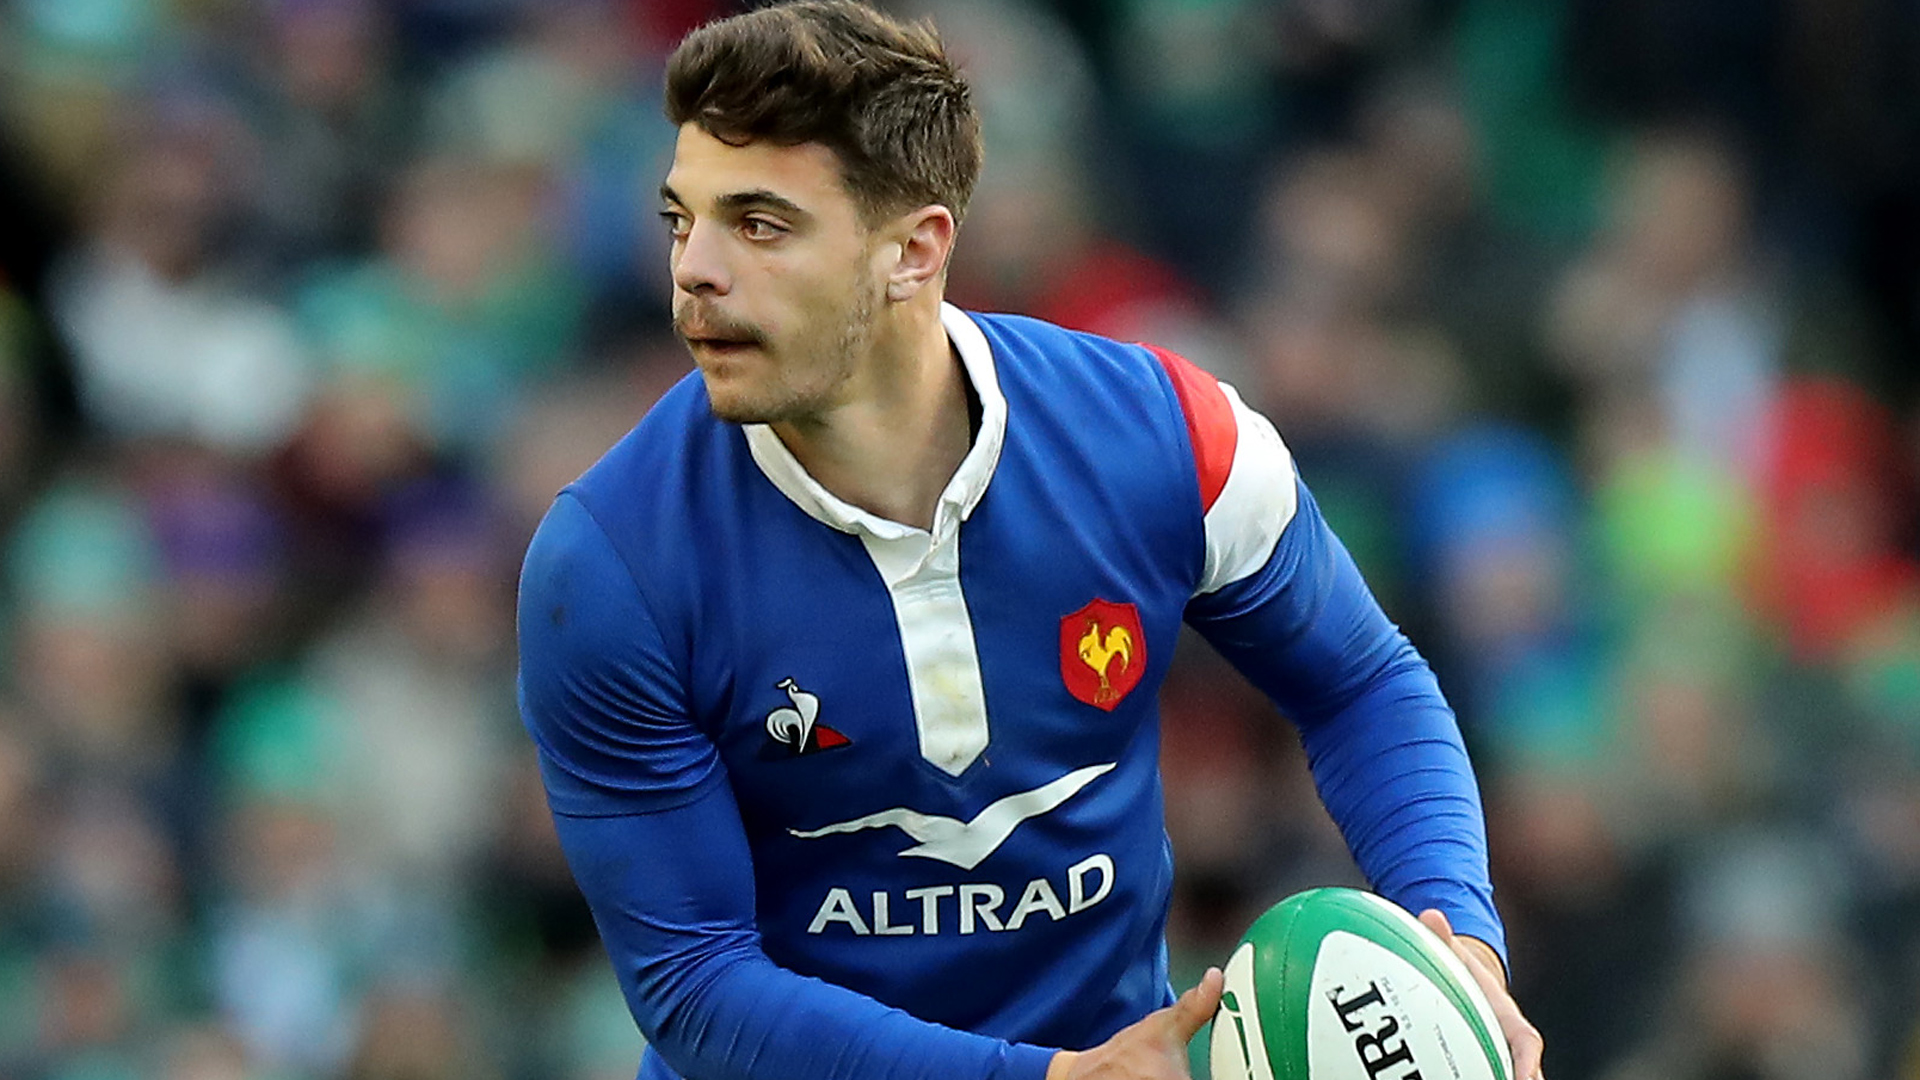 Less than eight months after his Test debut, Romain Ntamack, 20, will start for France at the Rugby World Cup.